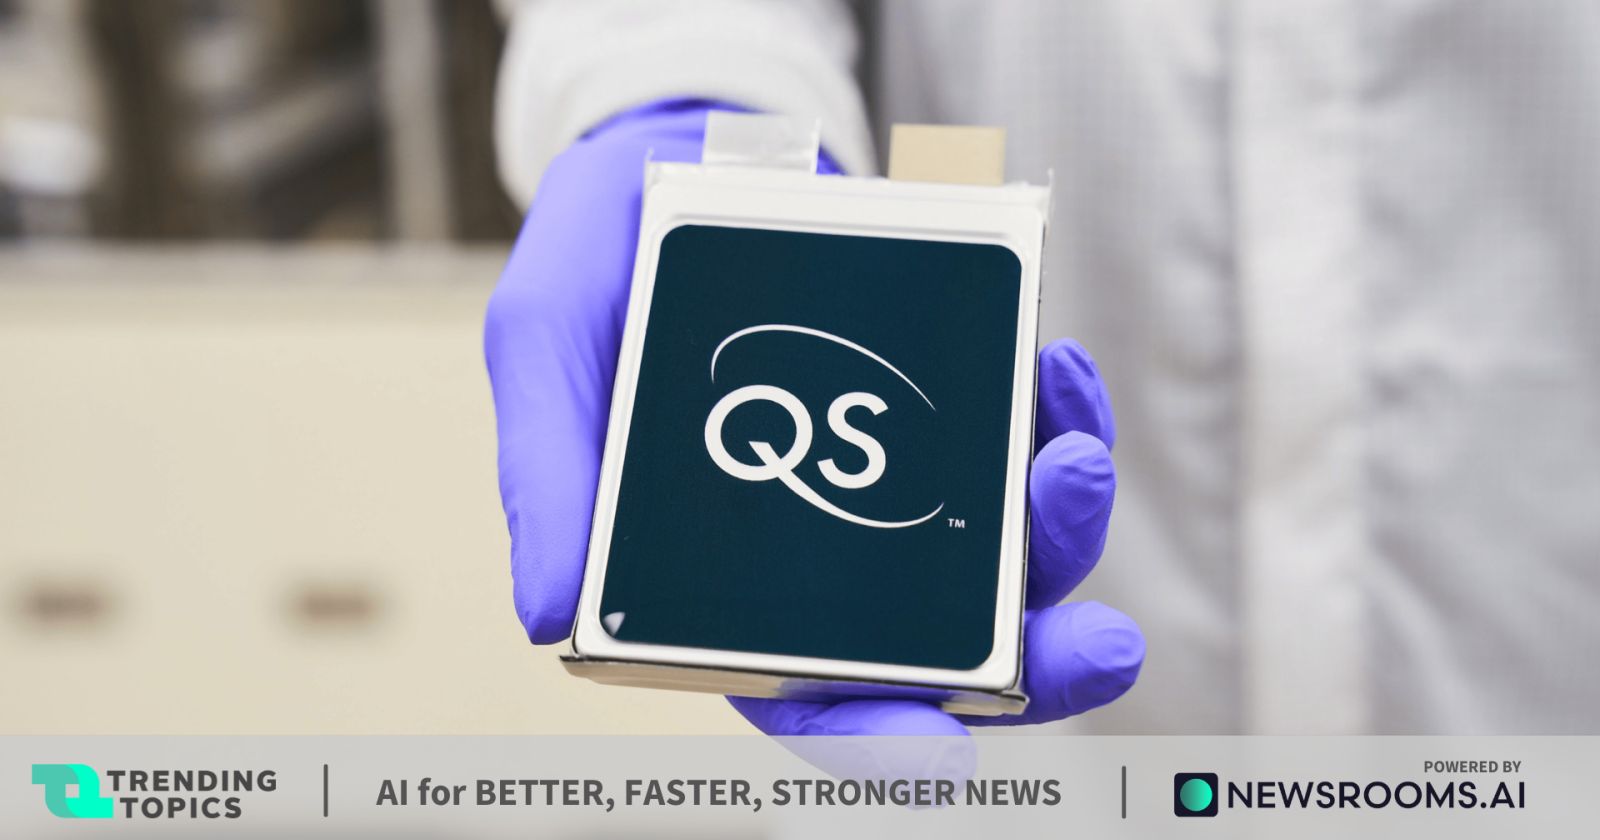 QuantumScape now wants to bring its solid state batteries into series production in 2025